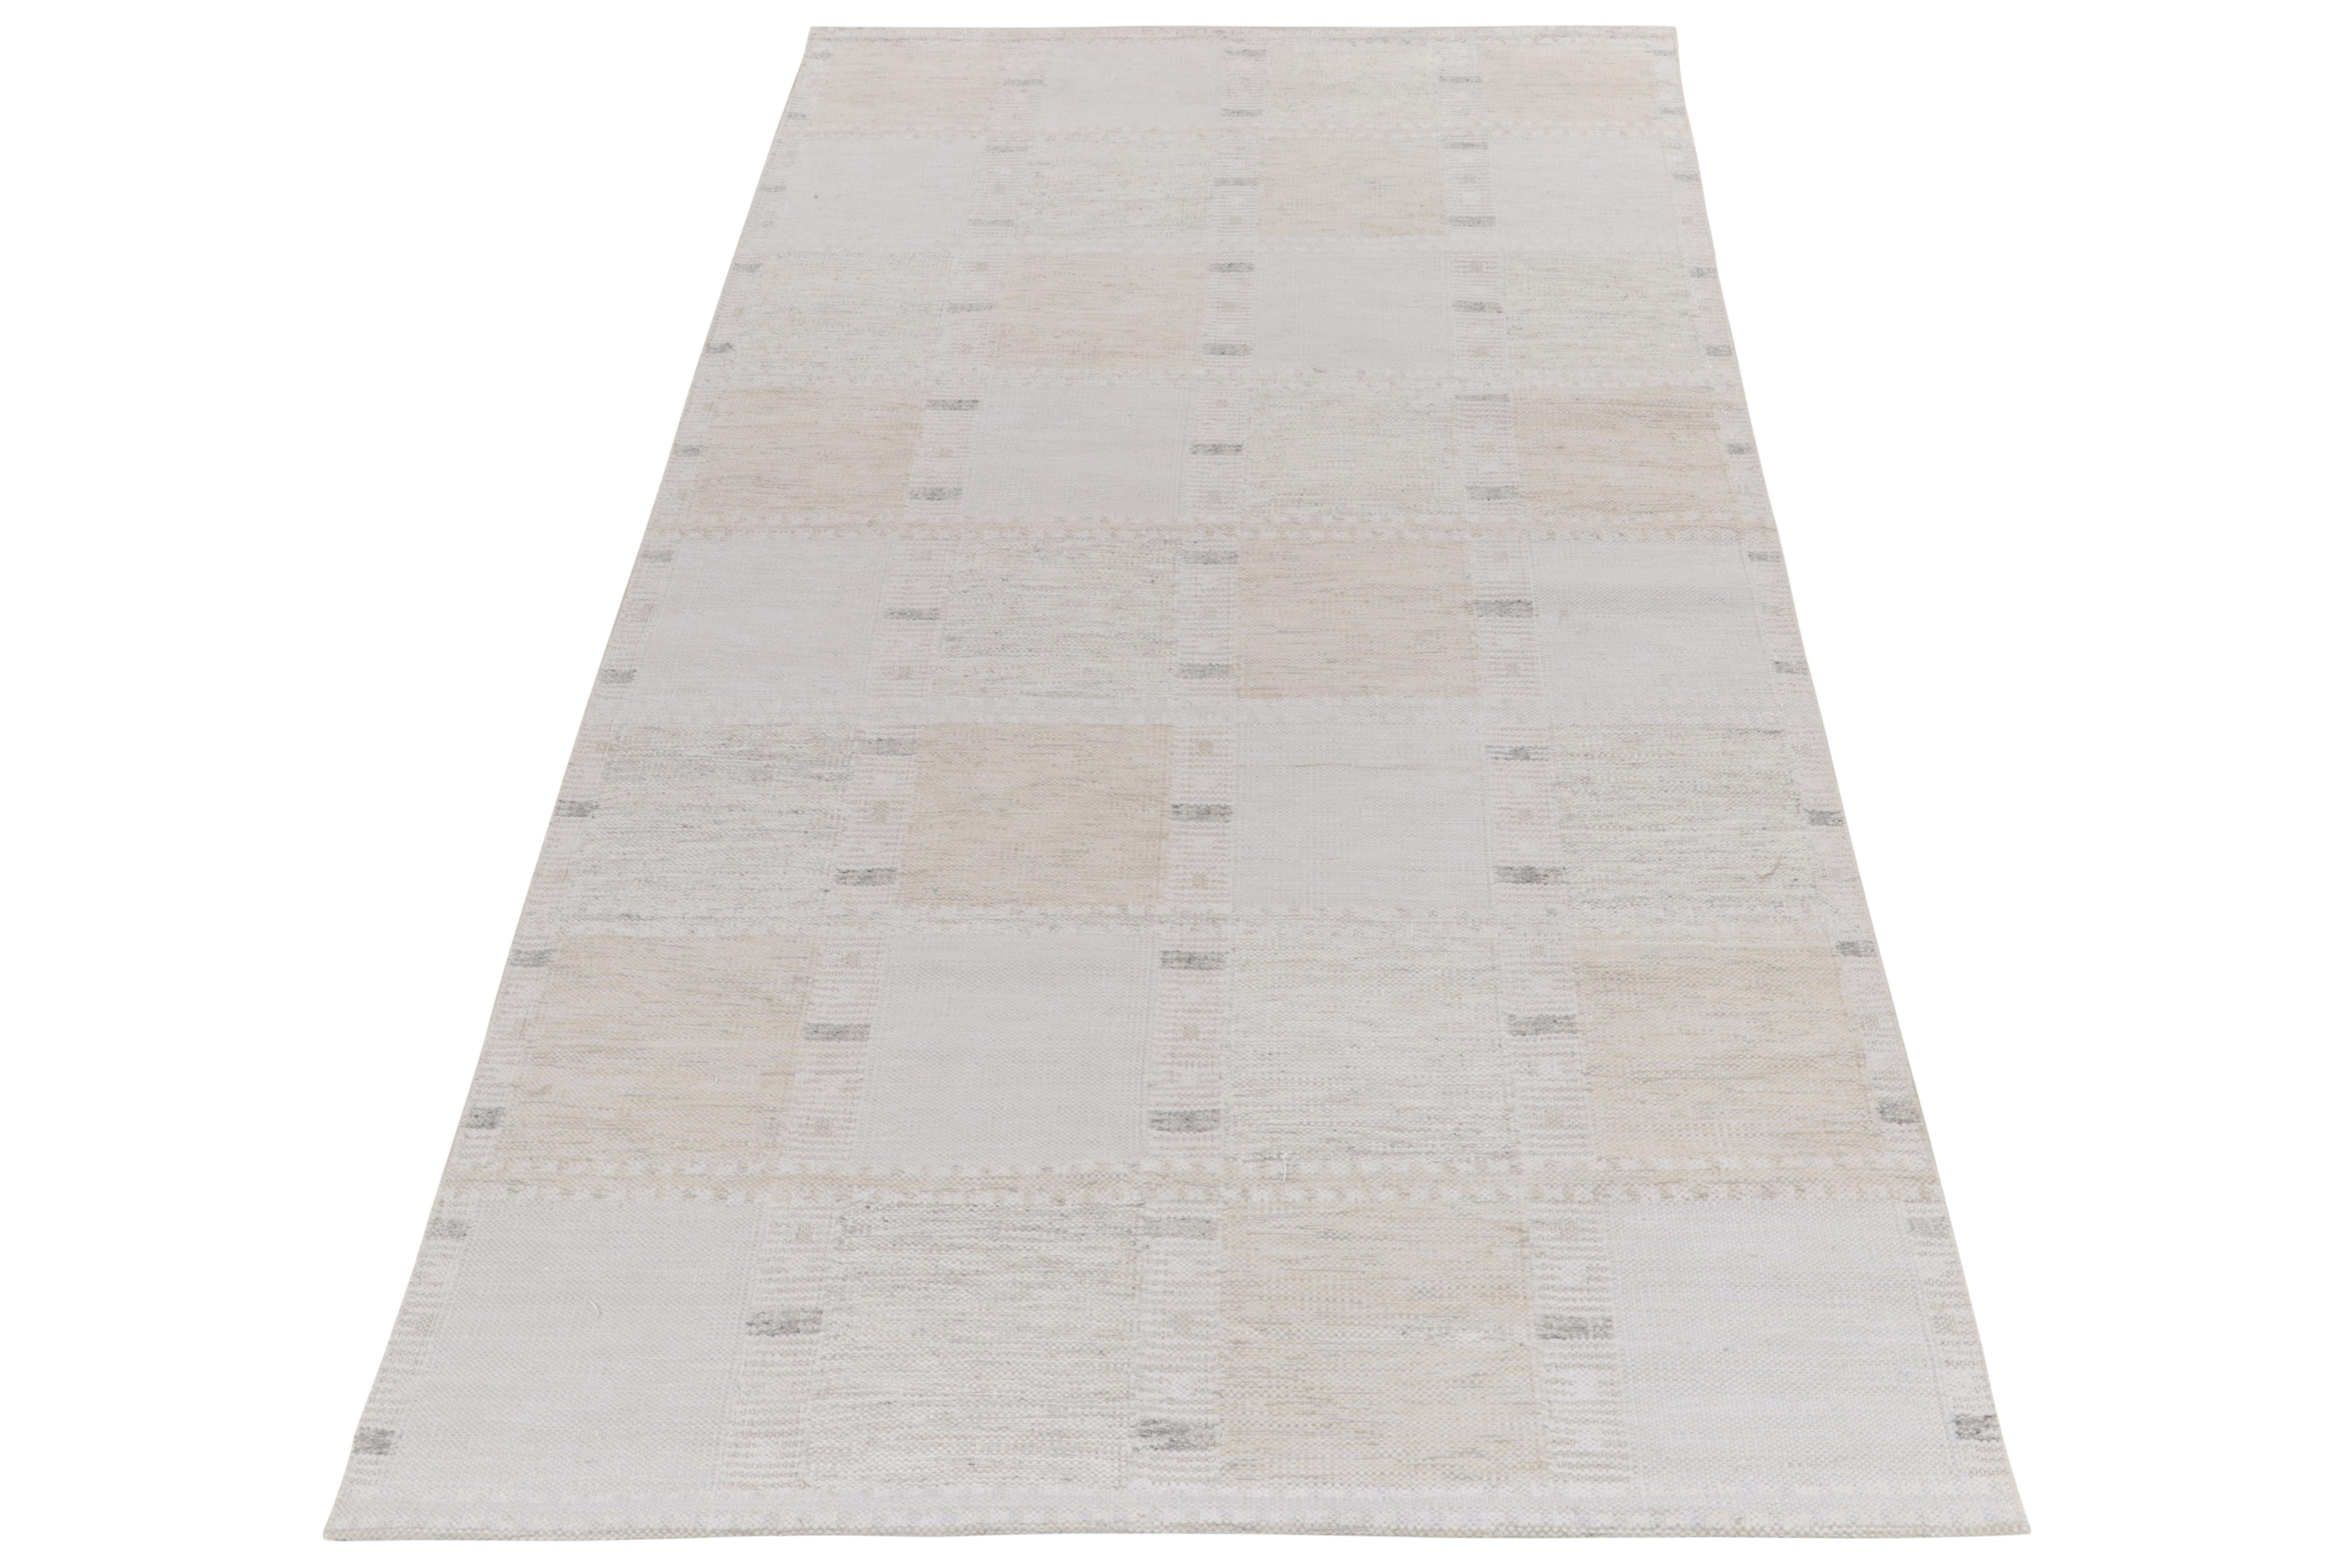 Handwoven in fine quality wool, a 6x10 Kilim from our award-winning repertoire of Scandinavian flatweaves. The kilim rug features a depthful geometric movement reveling in white, muted gray & beige tones with a quiet appeal in Swedish Modernist